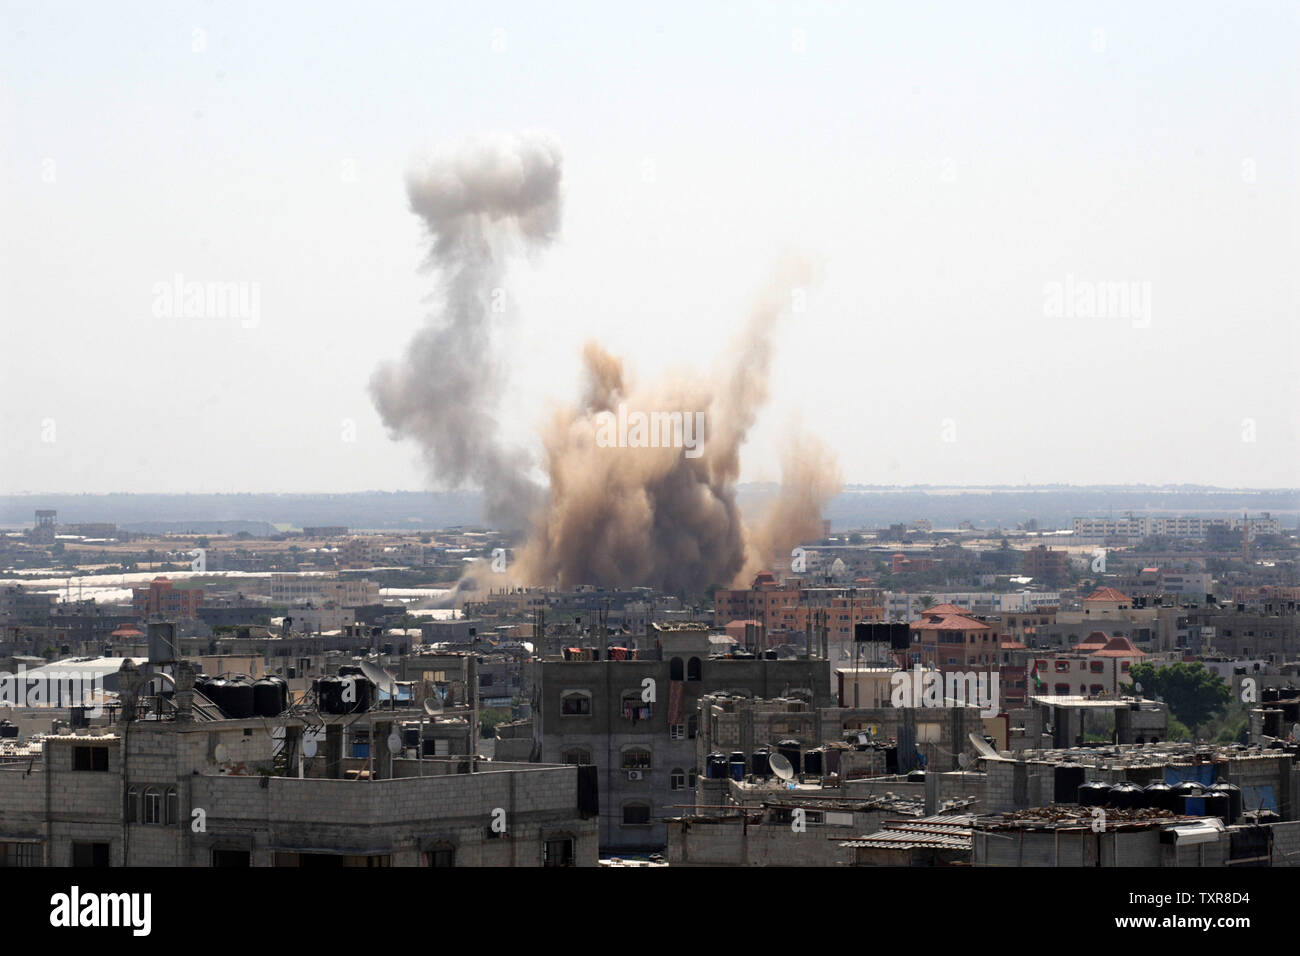 Smoke rises over Rafah in the southern Gaza Strip after an Israeli strike on August 8, 2014.   Hamas rejected an extension of the three-day truce being negotiated in Egypt since they say Israel rejected all of the Hamas demands. UPI/Ismael Mohamad Stock Photo